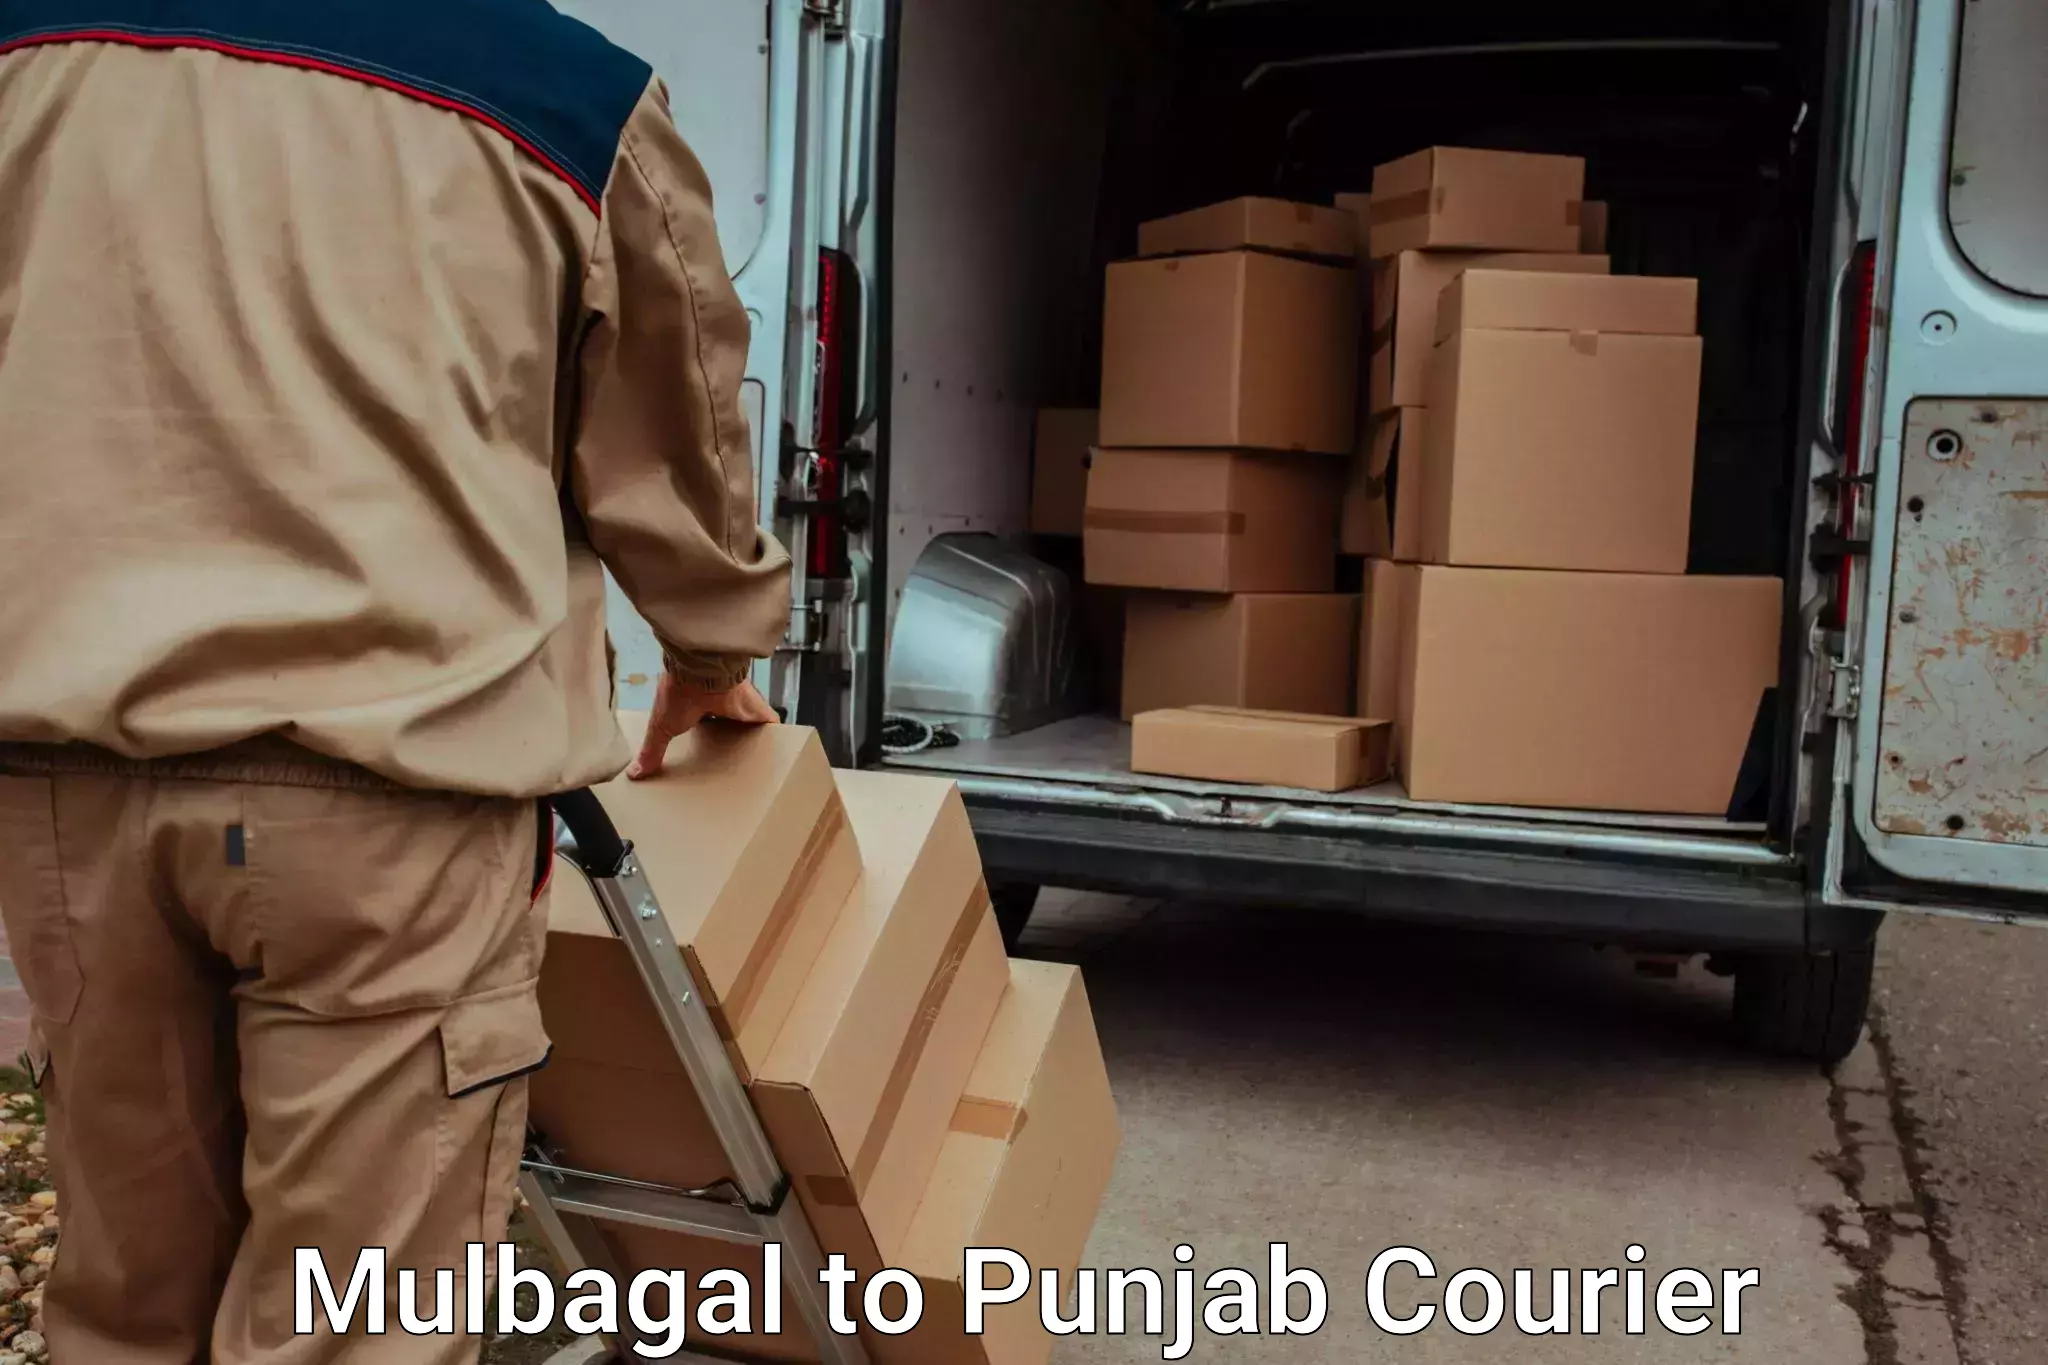 Full-service furniture transport in Mulbagal to Malout